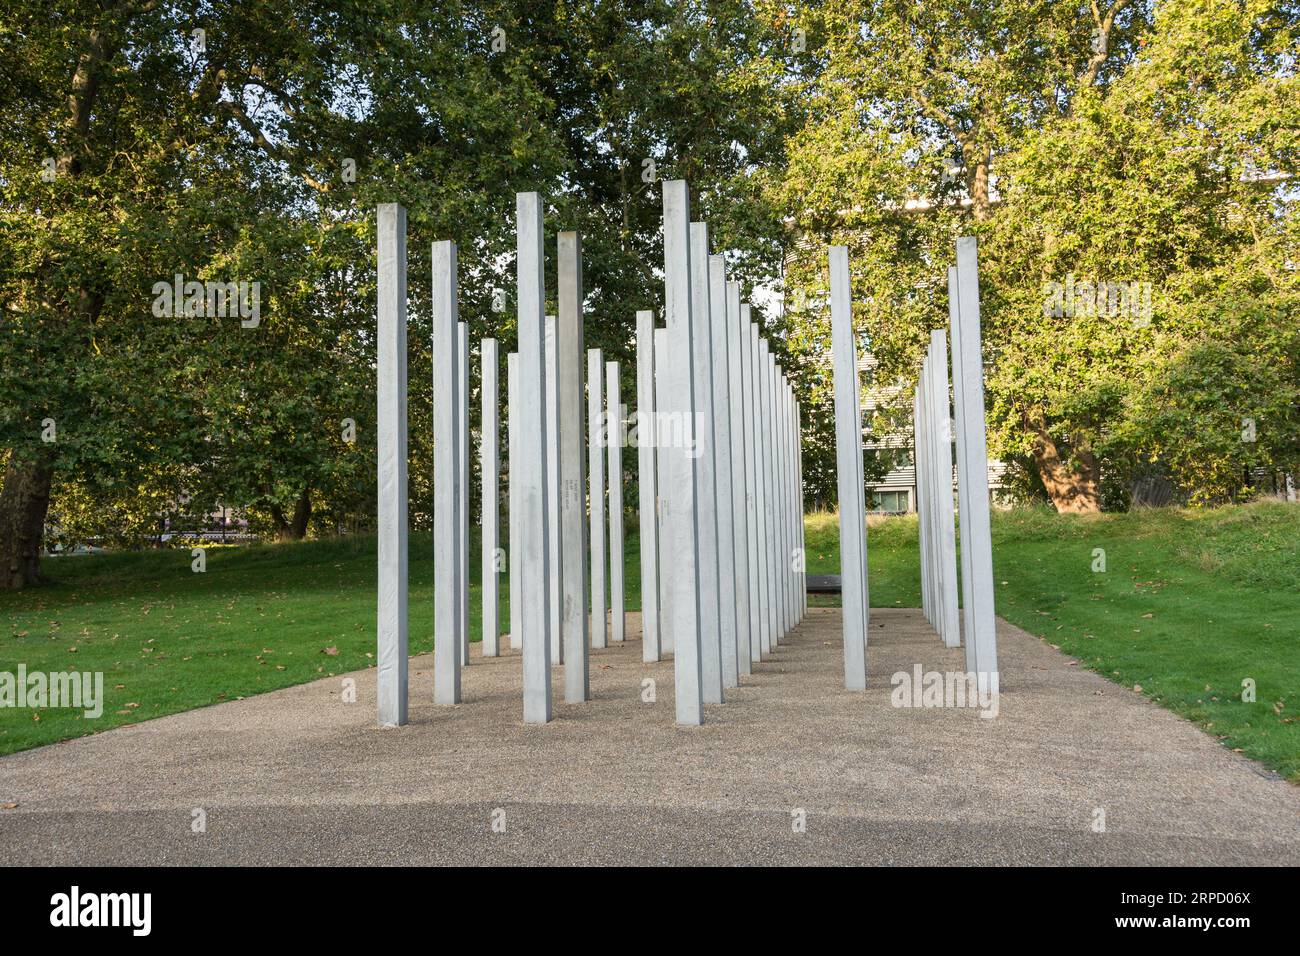 Hyde Park Memorial in Memory of Those Killed in the London Bombings of 7th July 2005, London, England, U.K. Stock Photo